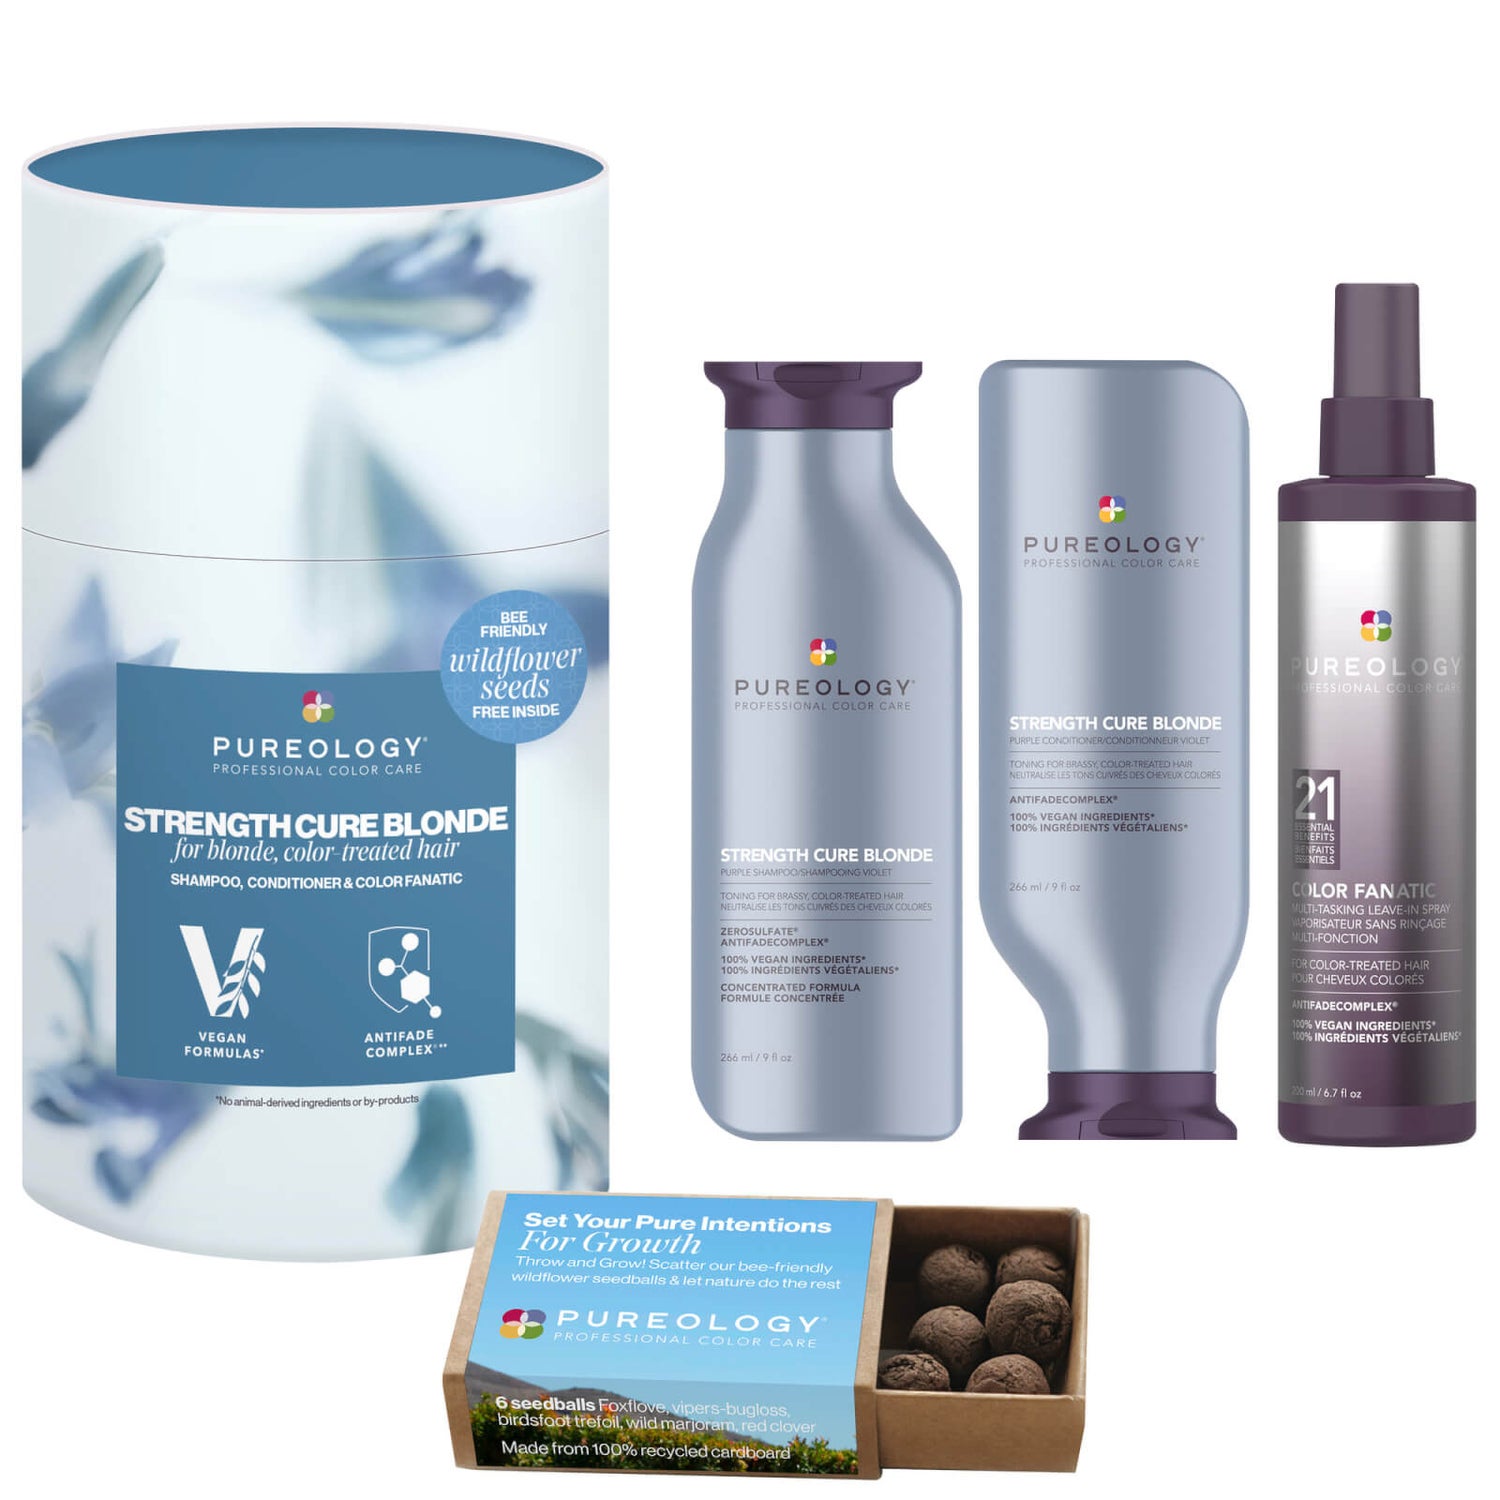 Pureology Strength Cure Blonde Gift Set (Worth £72.70)